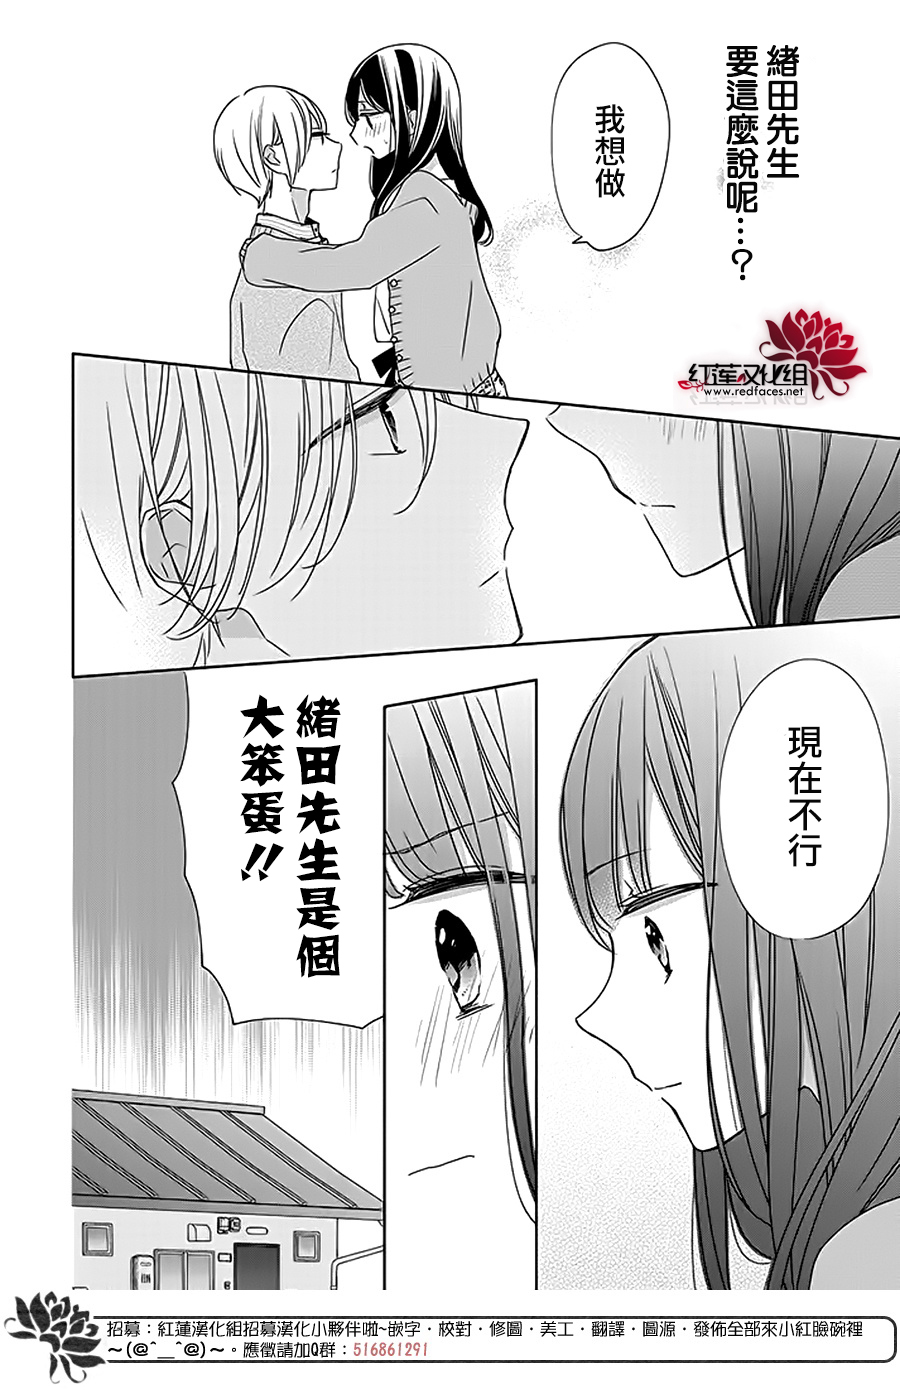 If given a second chance - 第33話 - 2